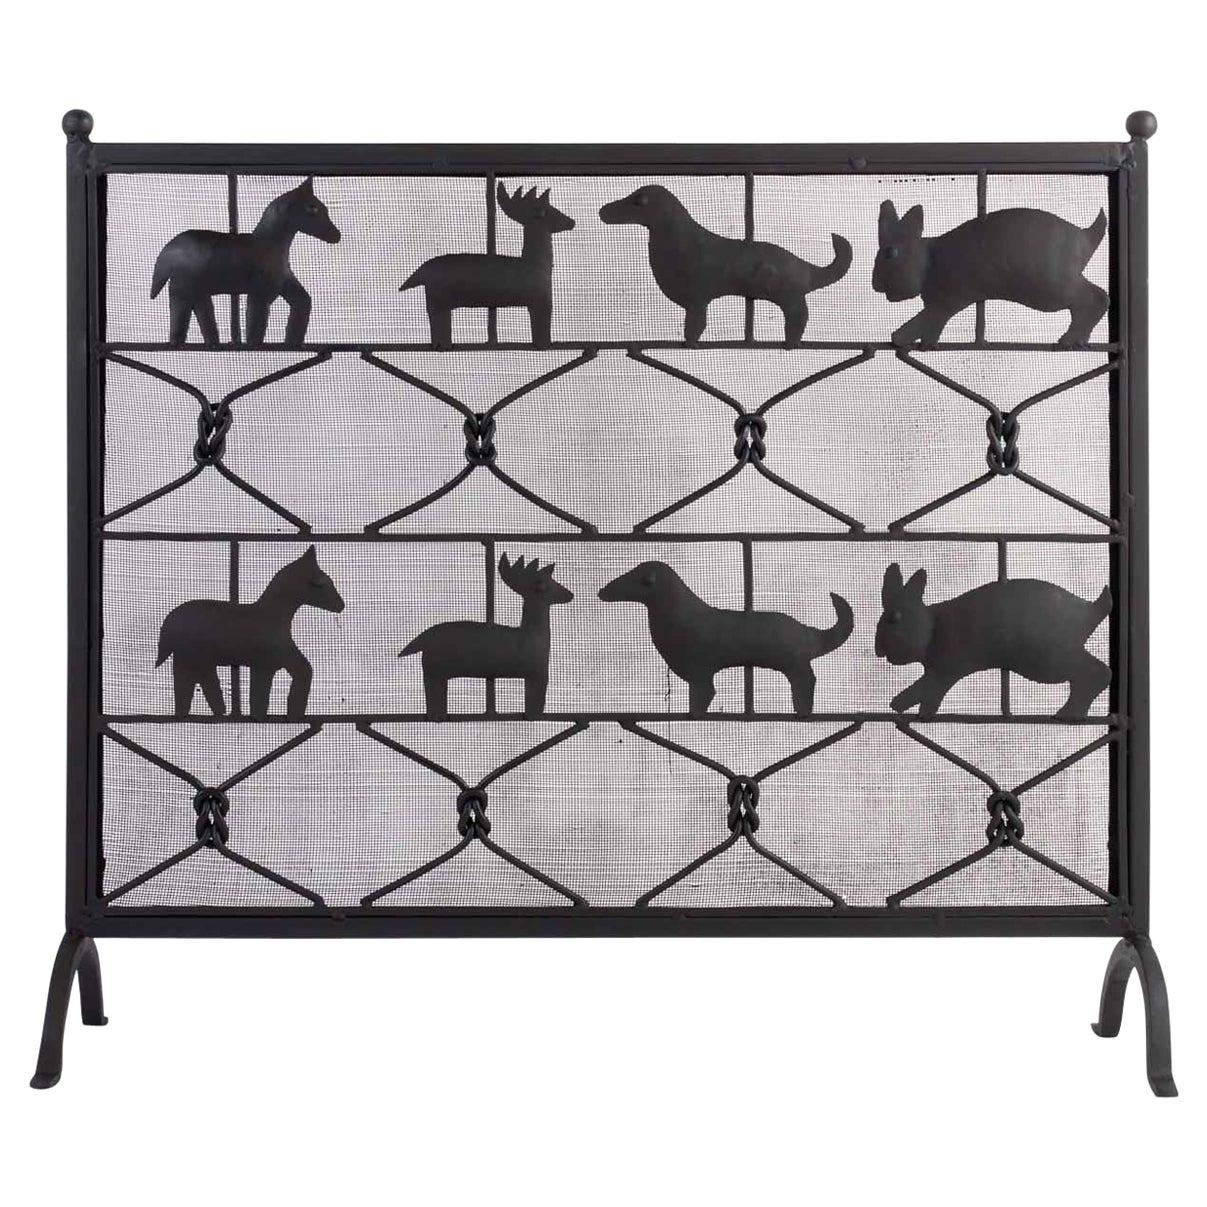 1950 Ateliers Marolles Fire Screen in Wrought Iron